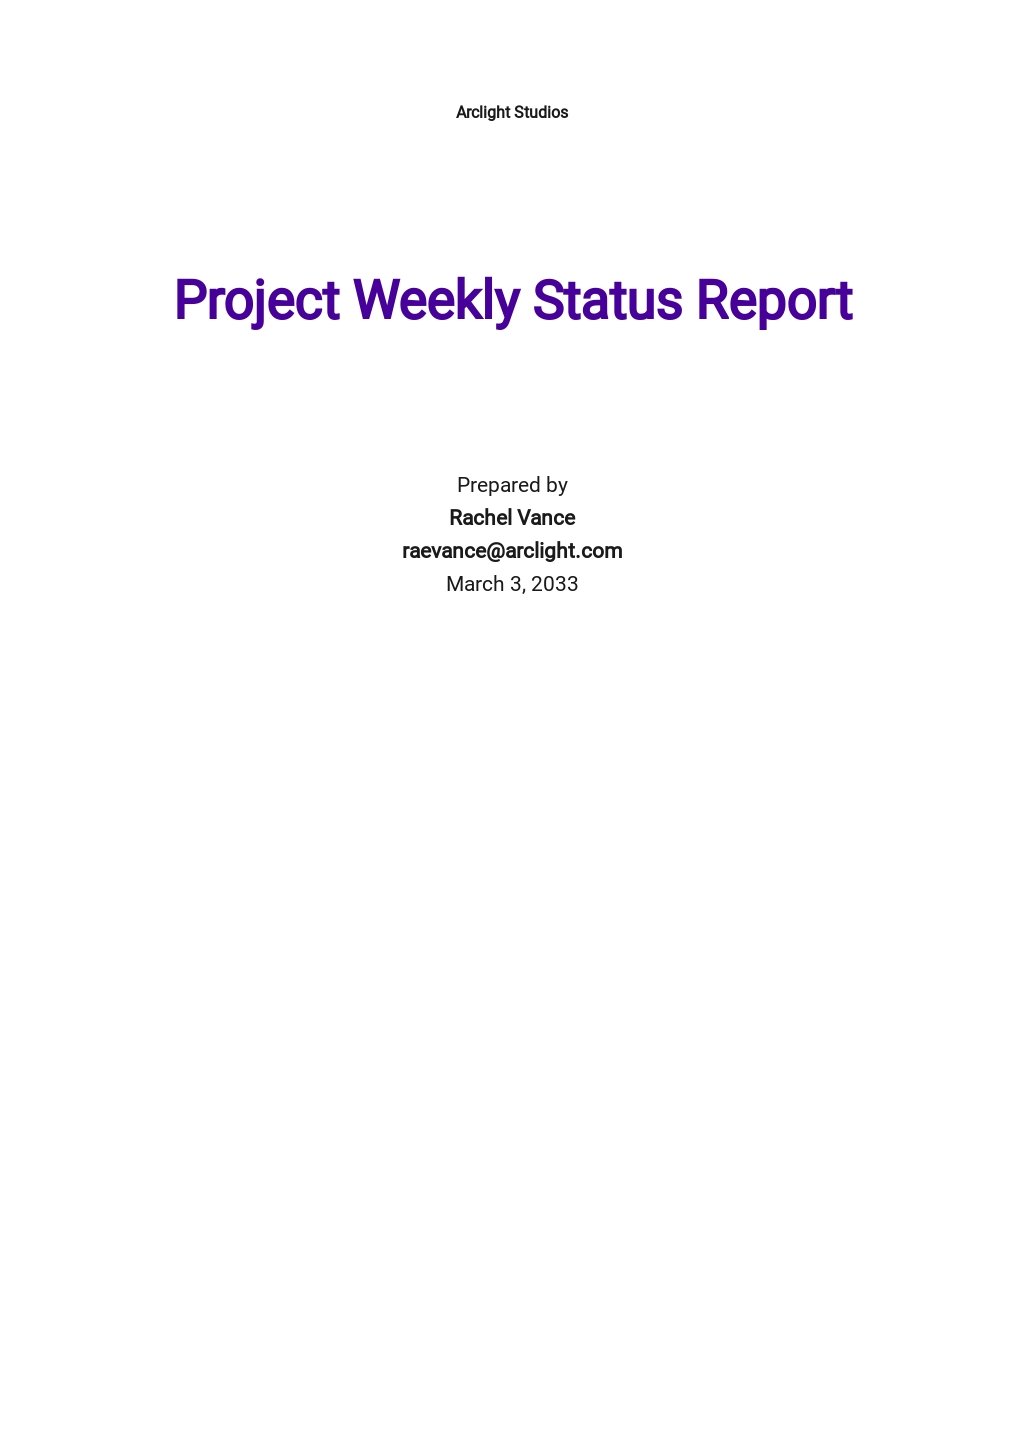 Project Weekly Status Report Template.jpe